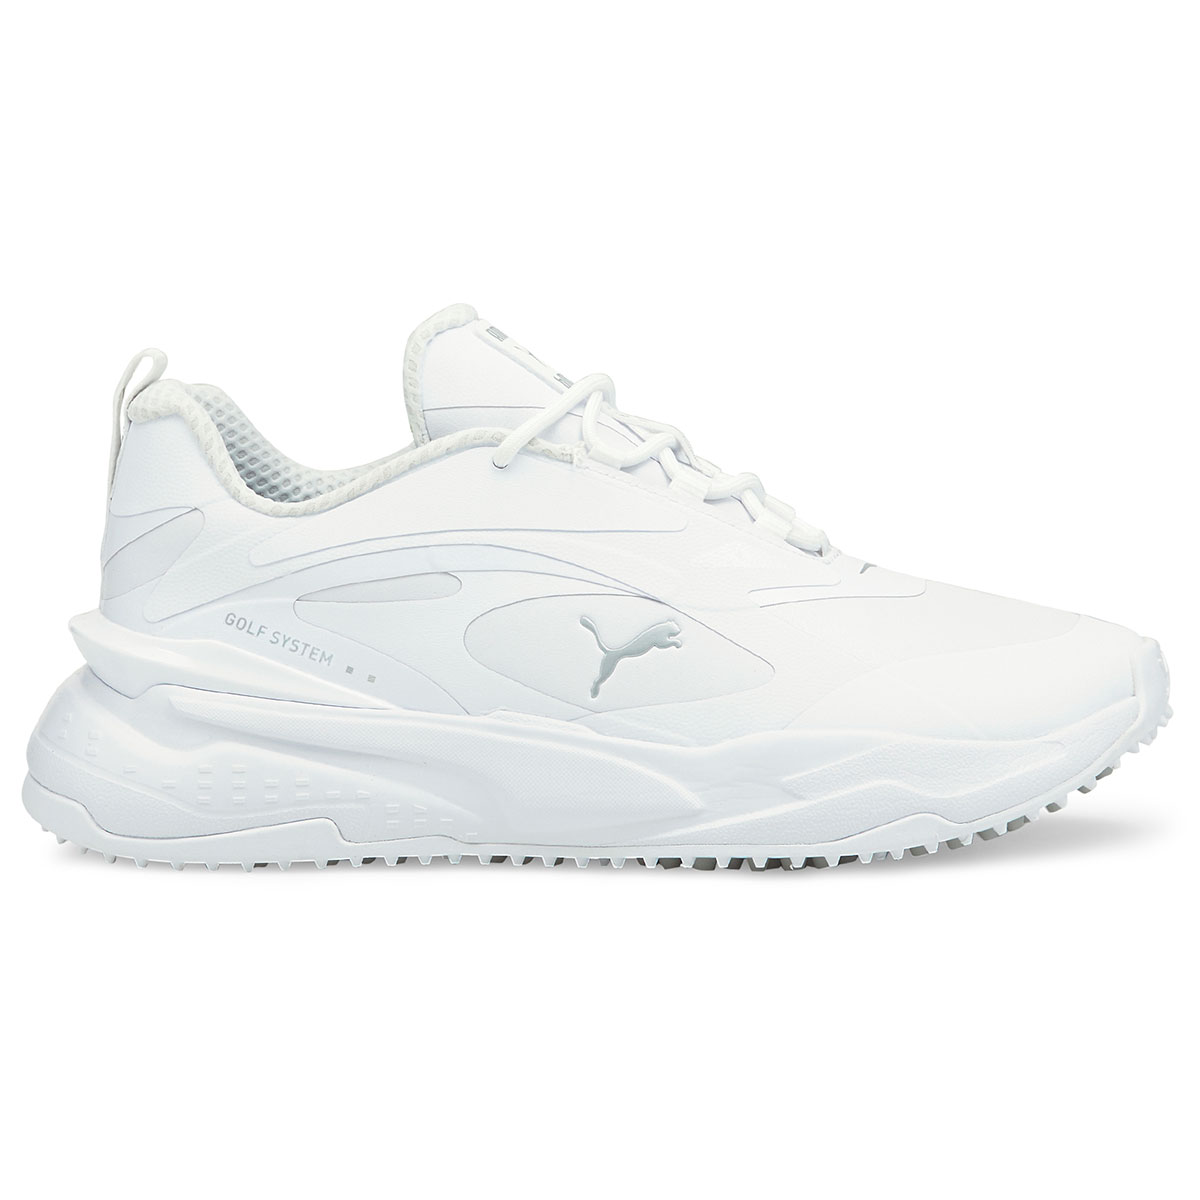 PUMA Ladies GS-Fast Waterproof Spikeless Golf Shoes from american golf